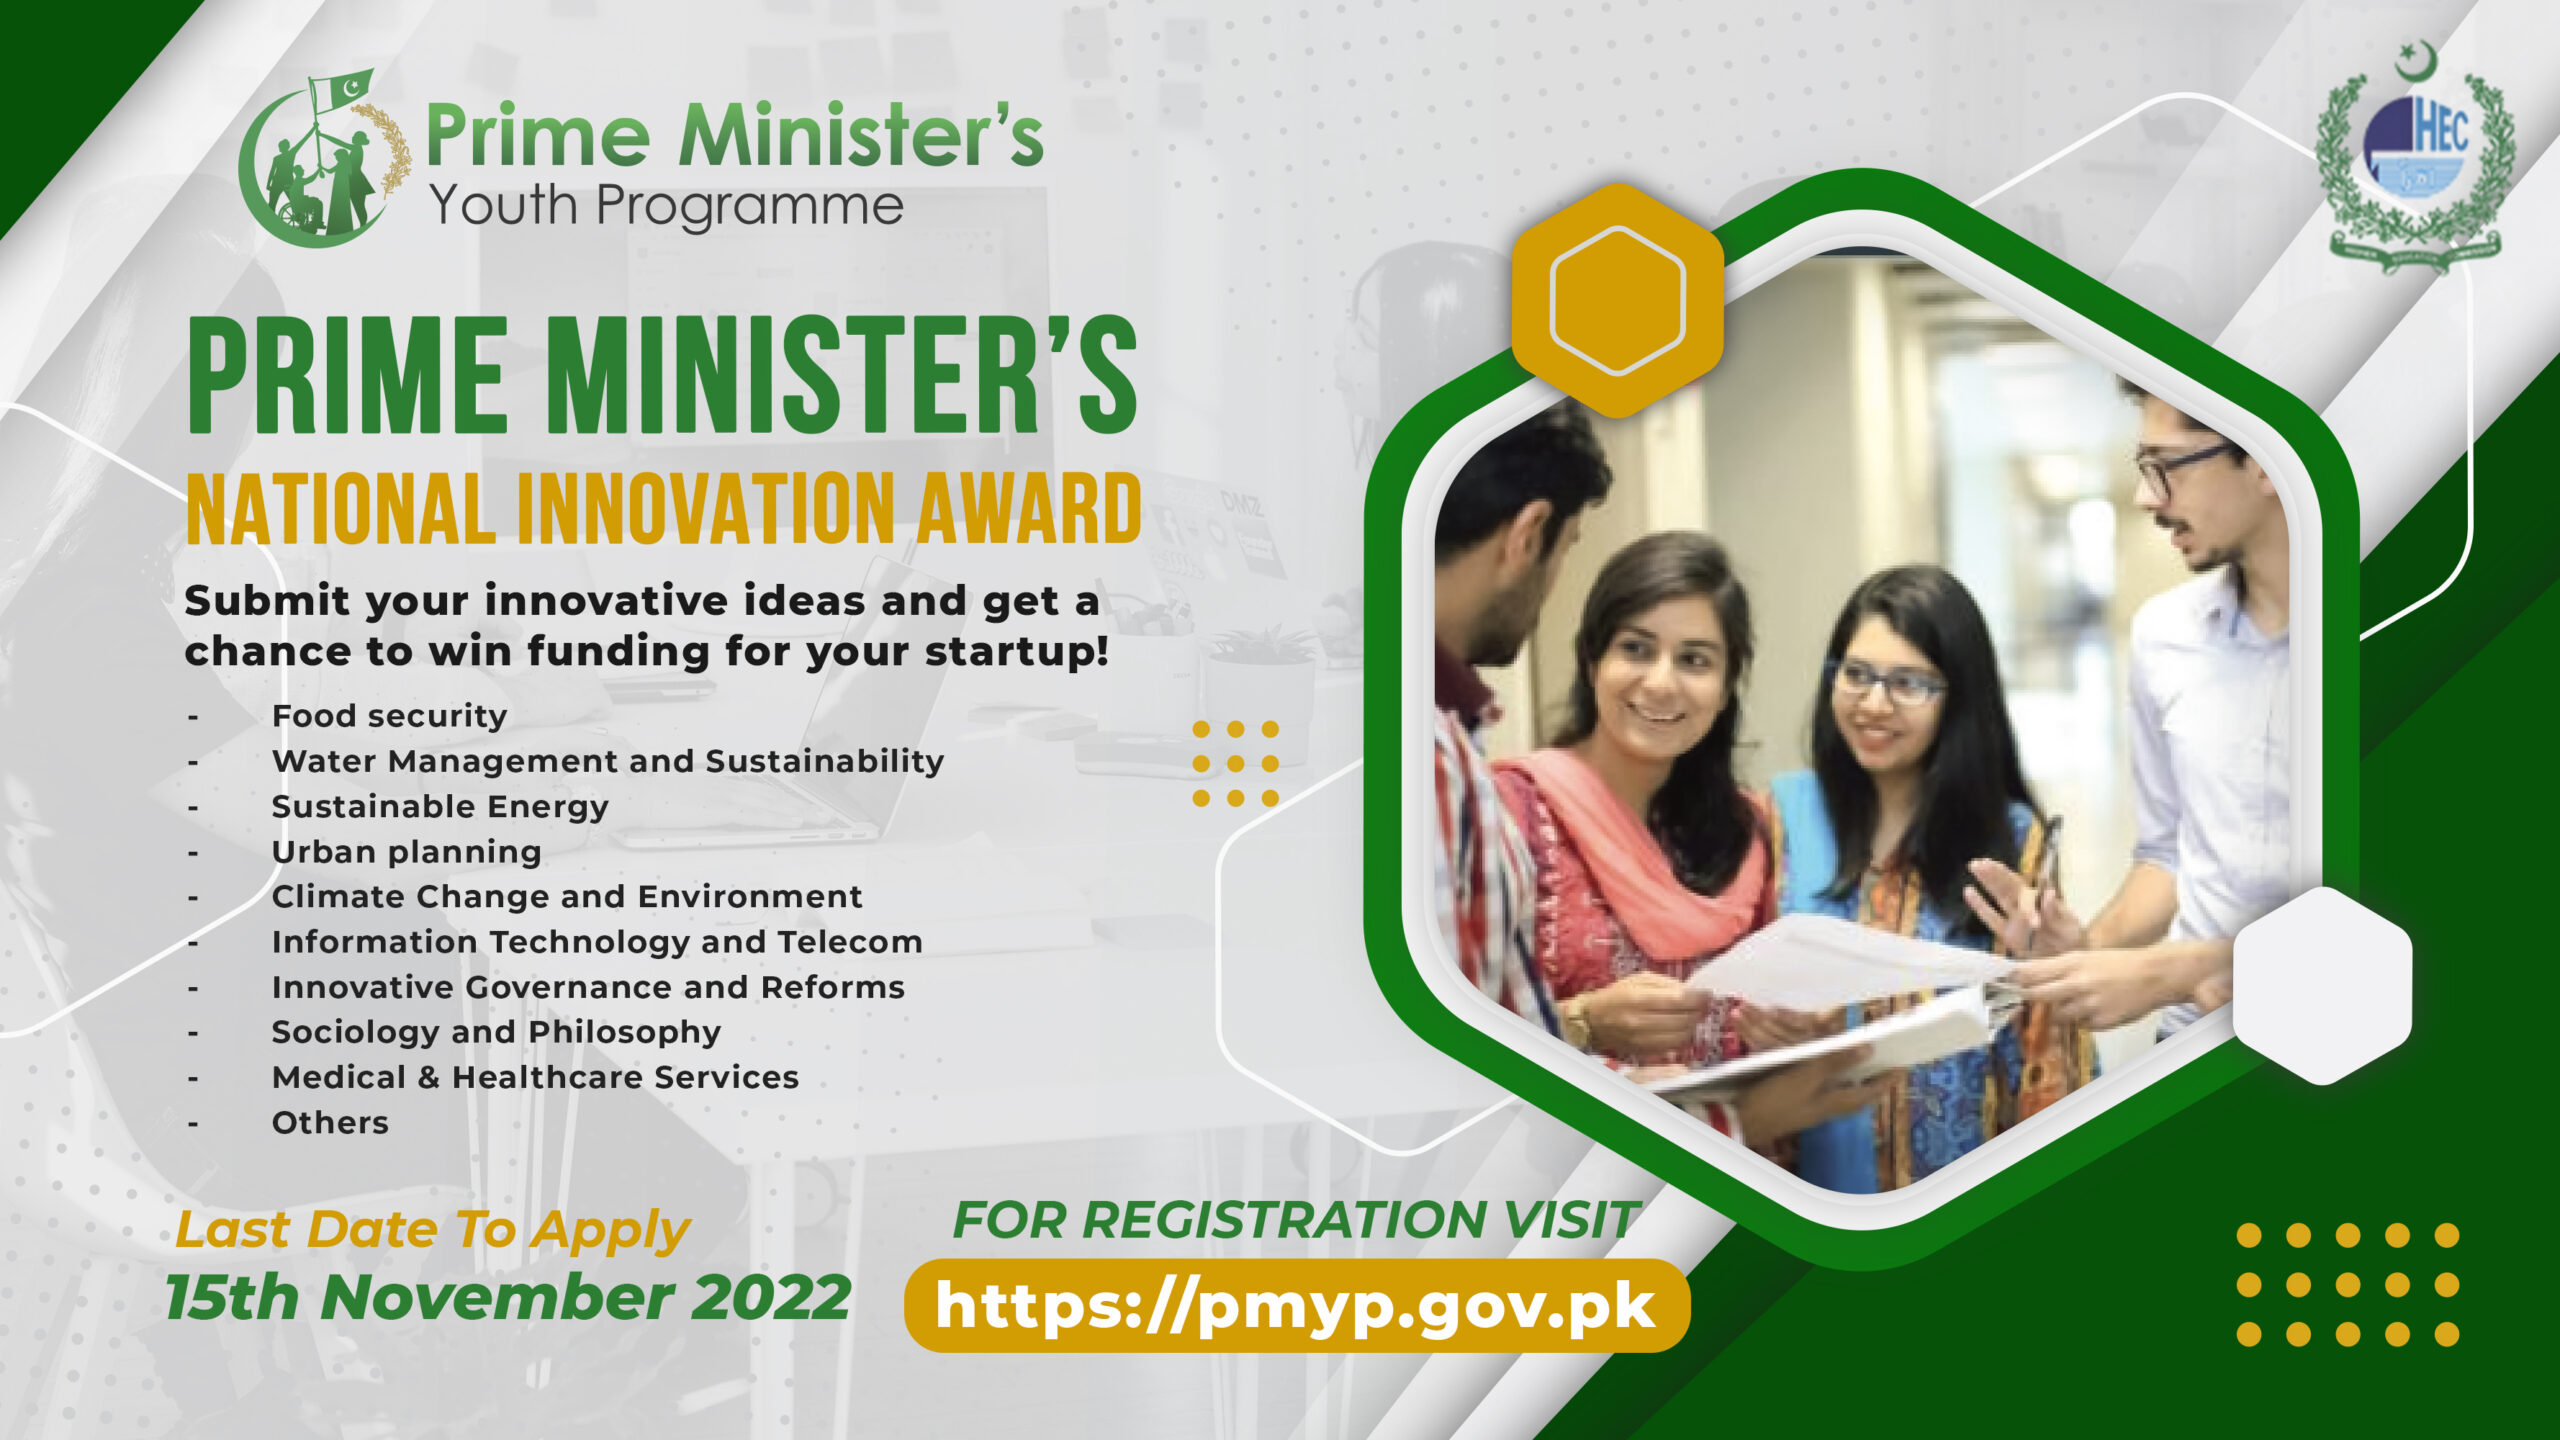 HEC is now accepting applications for the Prime Minister's Prime Minister’s Youth Programme